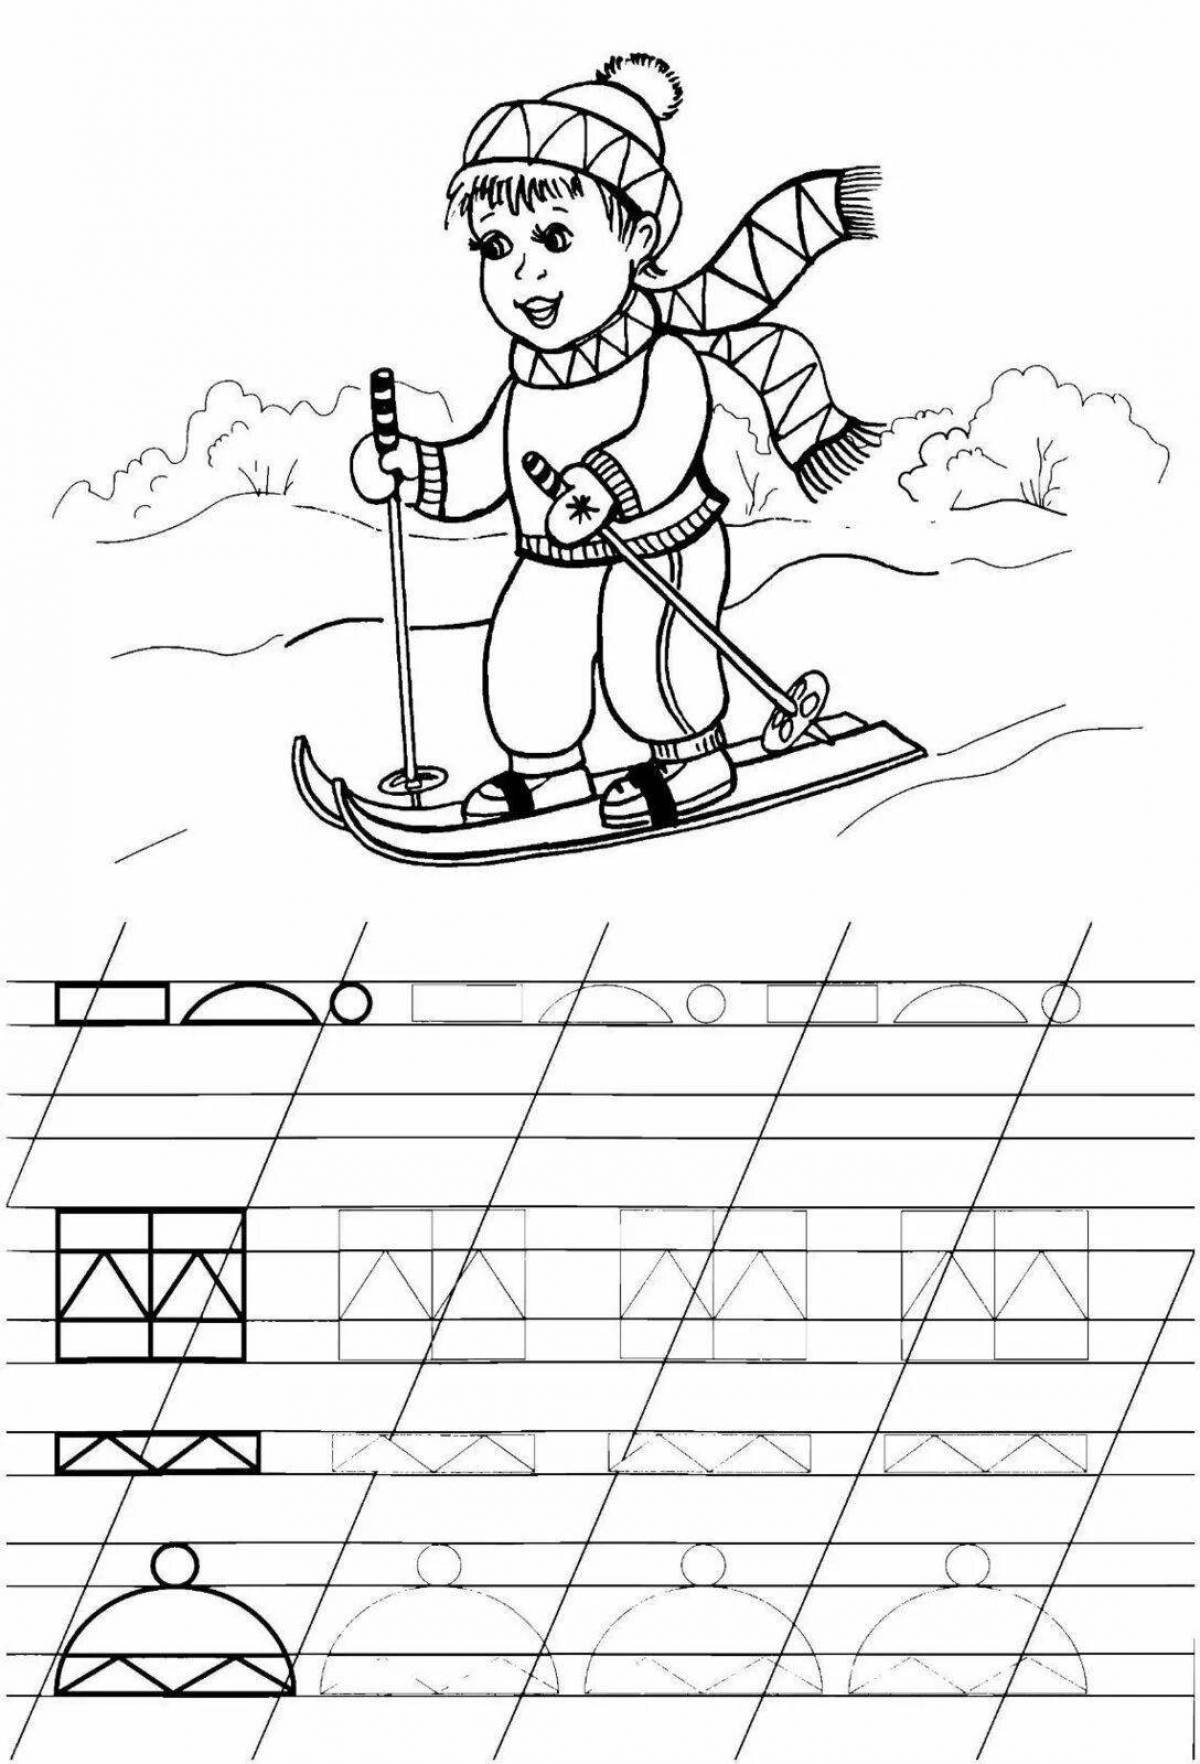 Exciting boy skiing coloring book